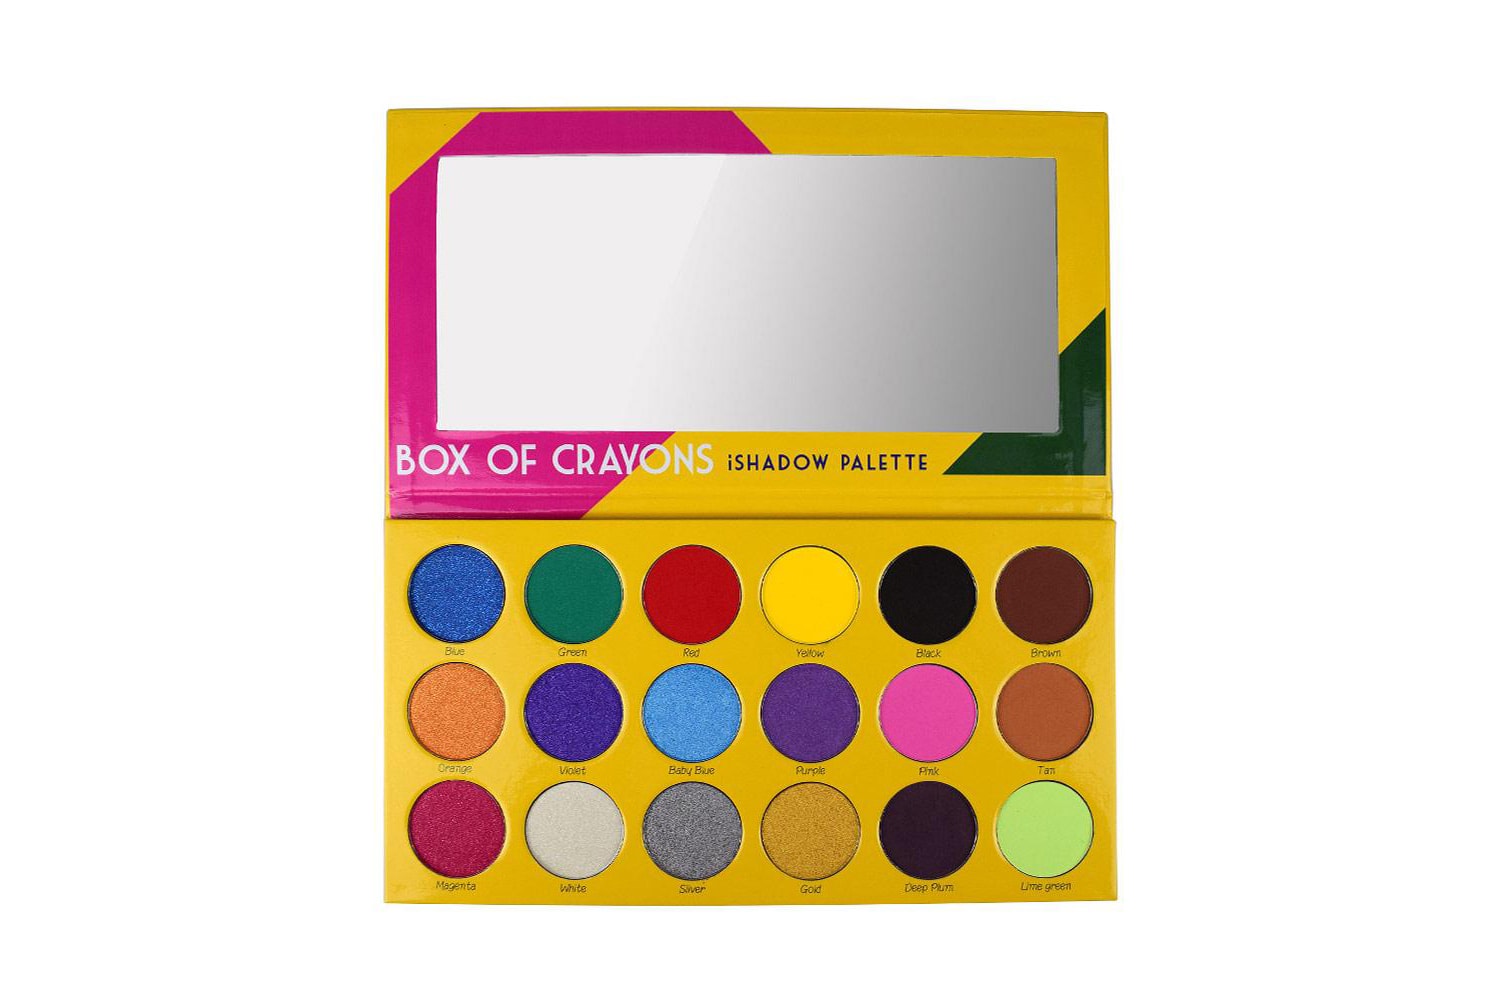 The crayon case box of crayons eyeshadow ishadow palette black owned beauty cosmetics company makeup crayola 90s